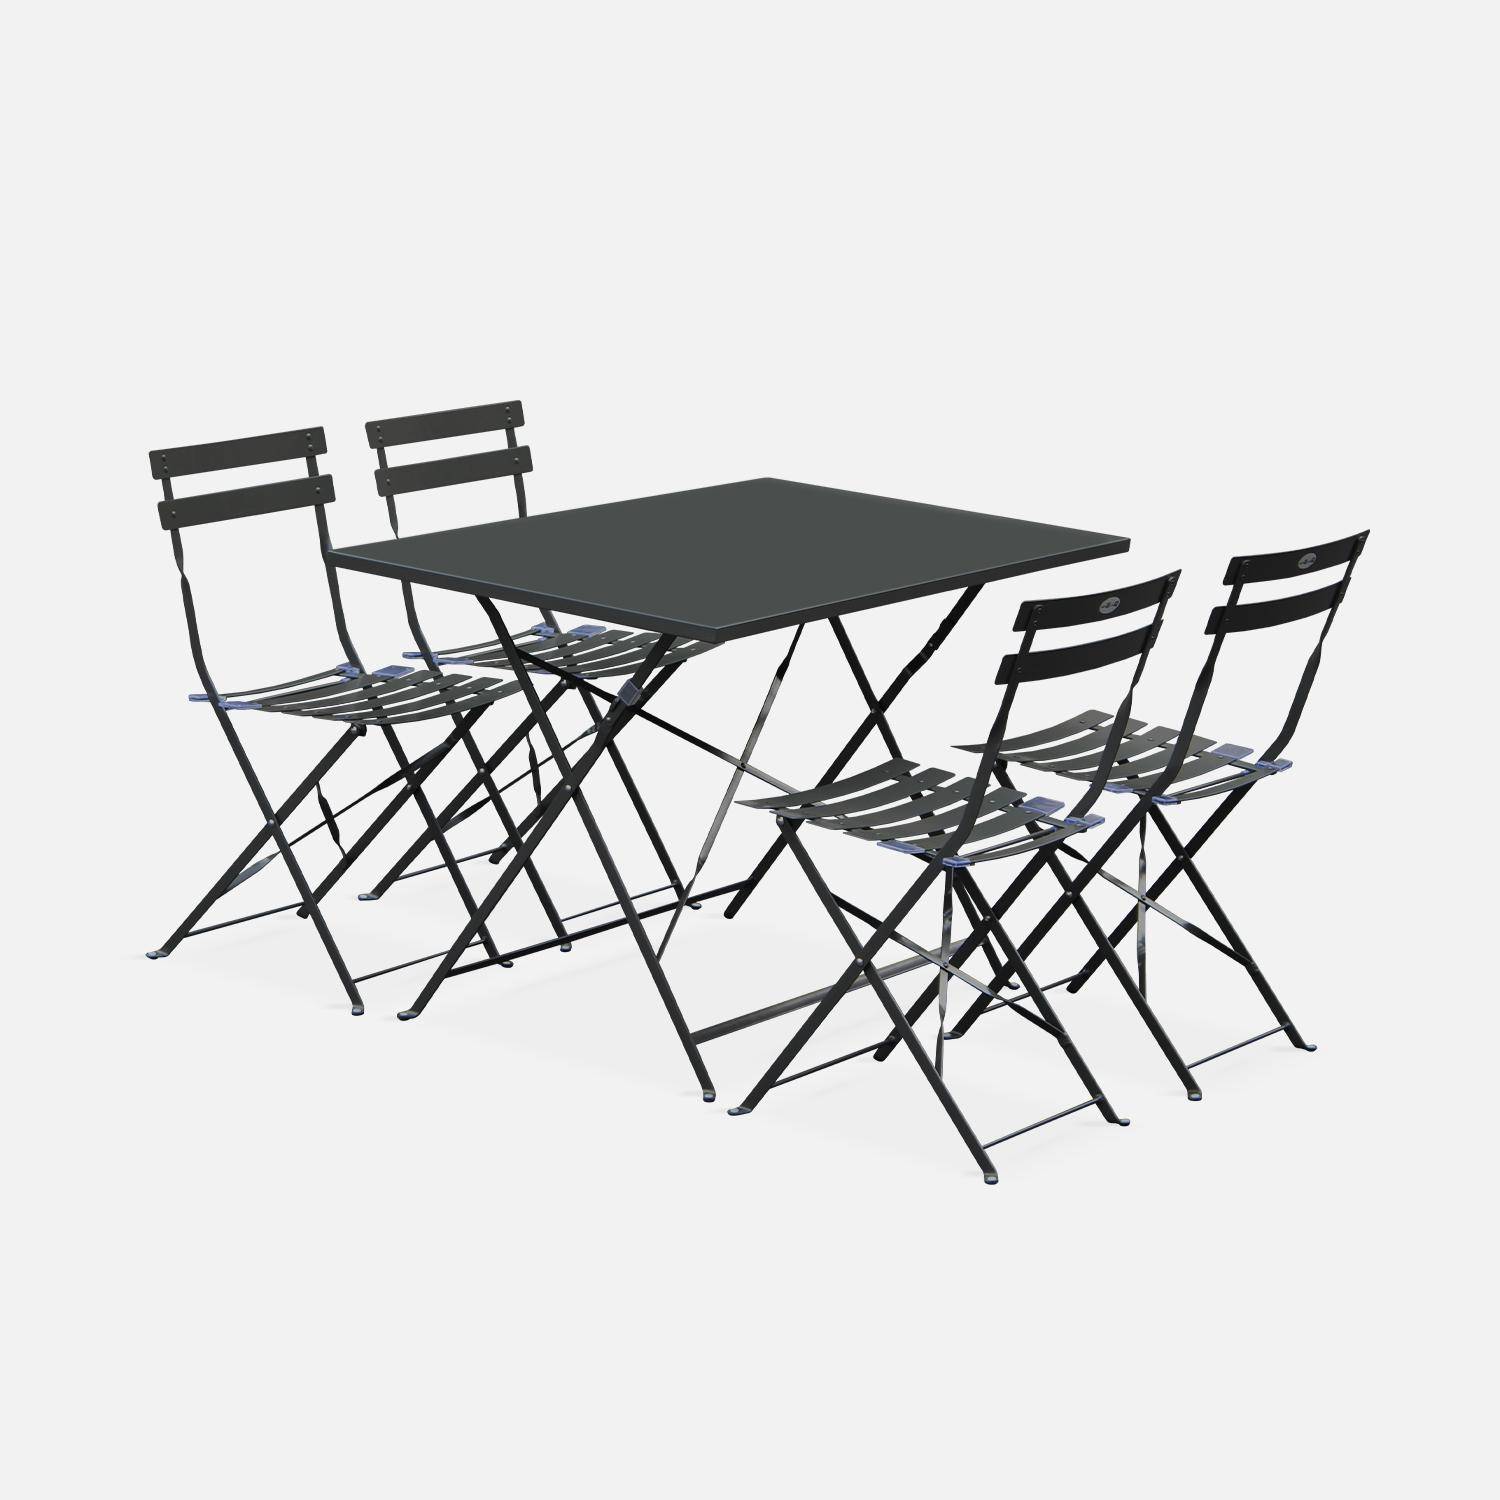 4-seater foldable thermo-lacquered steel bistro garden table with chairs, Emilia set 110cm, Anthracite,sweeek,Photo2